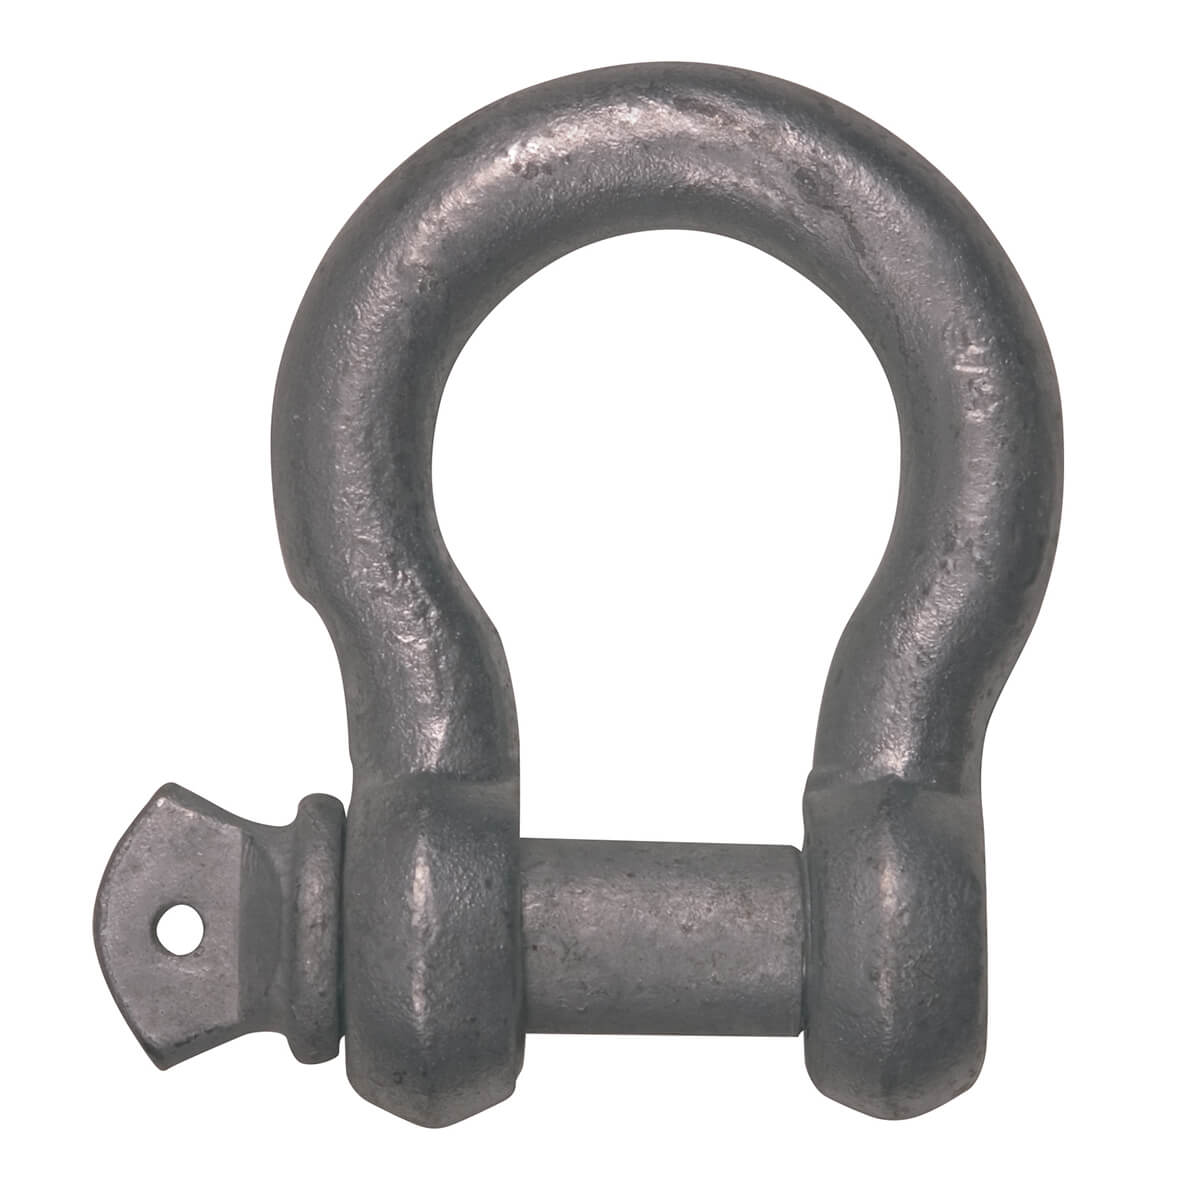 Screw Pin Anchor Shackles, Non-Rated - Galvanized